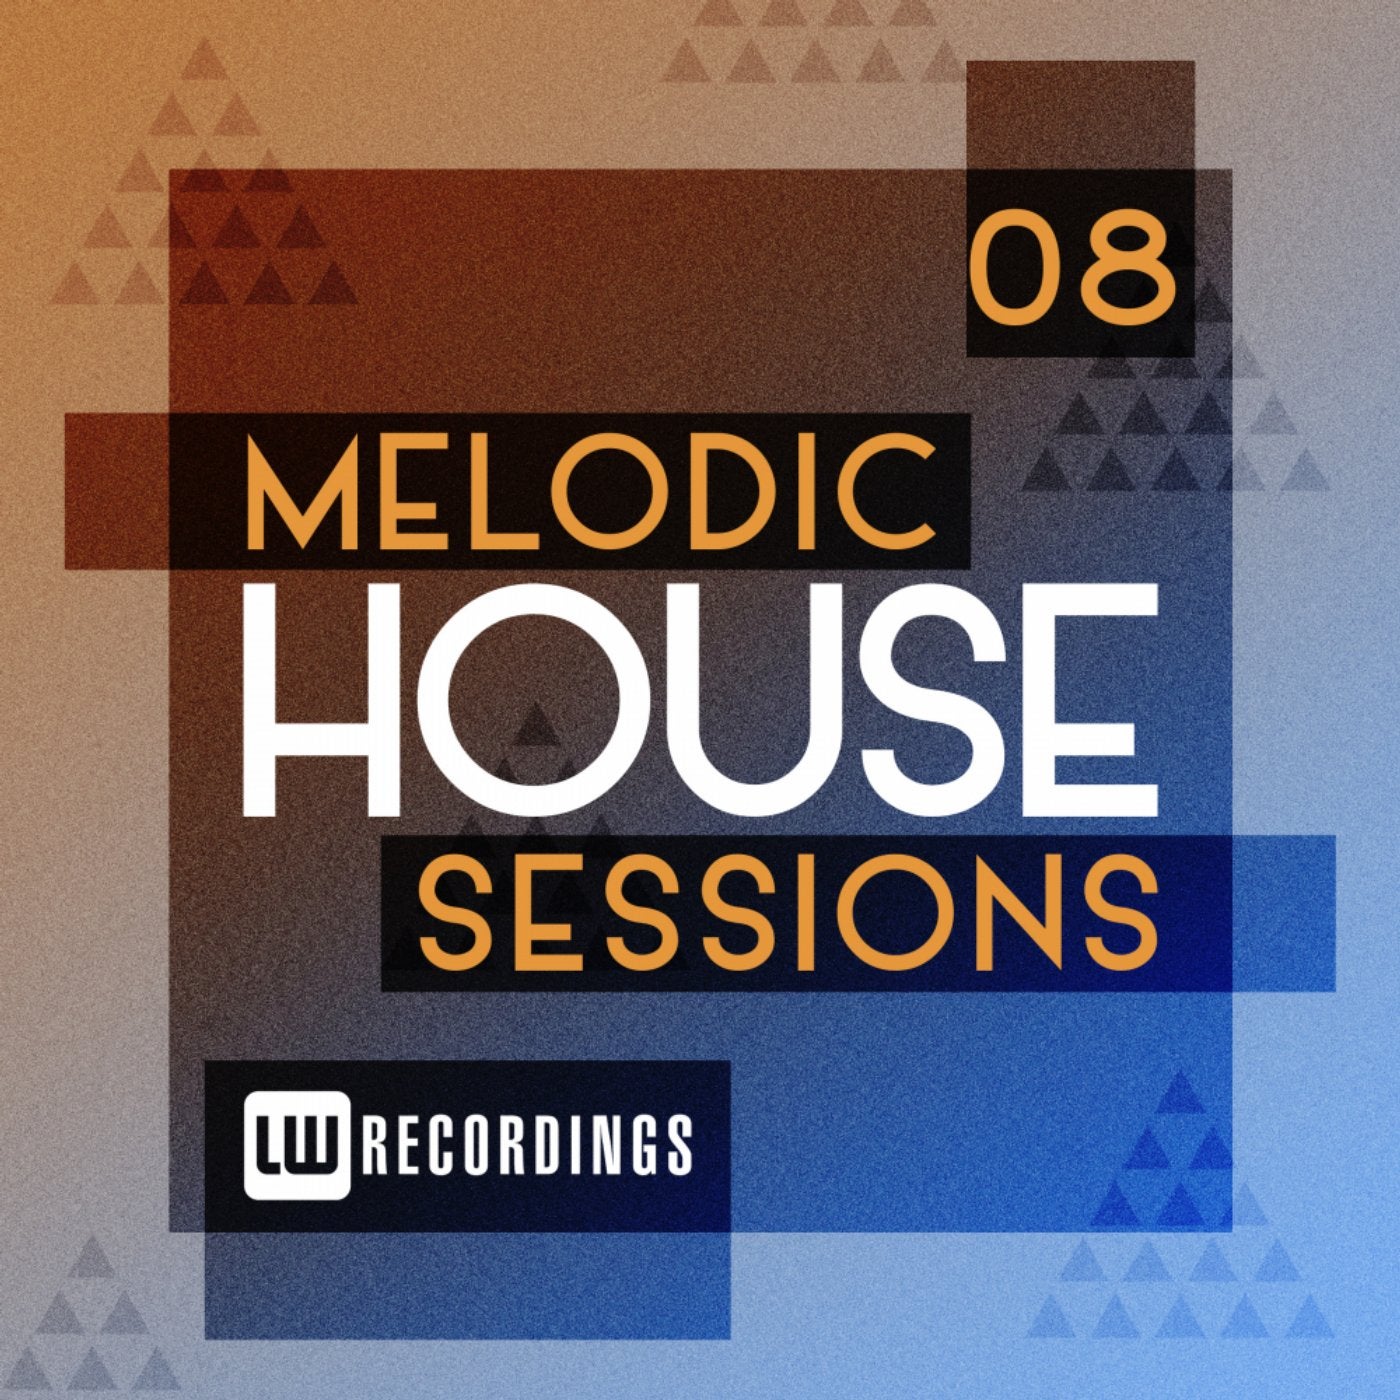 Melodic House Sessions, Vol. 08